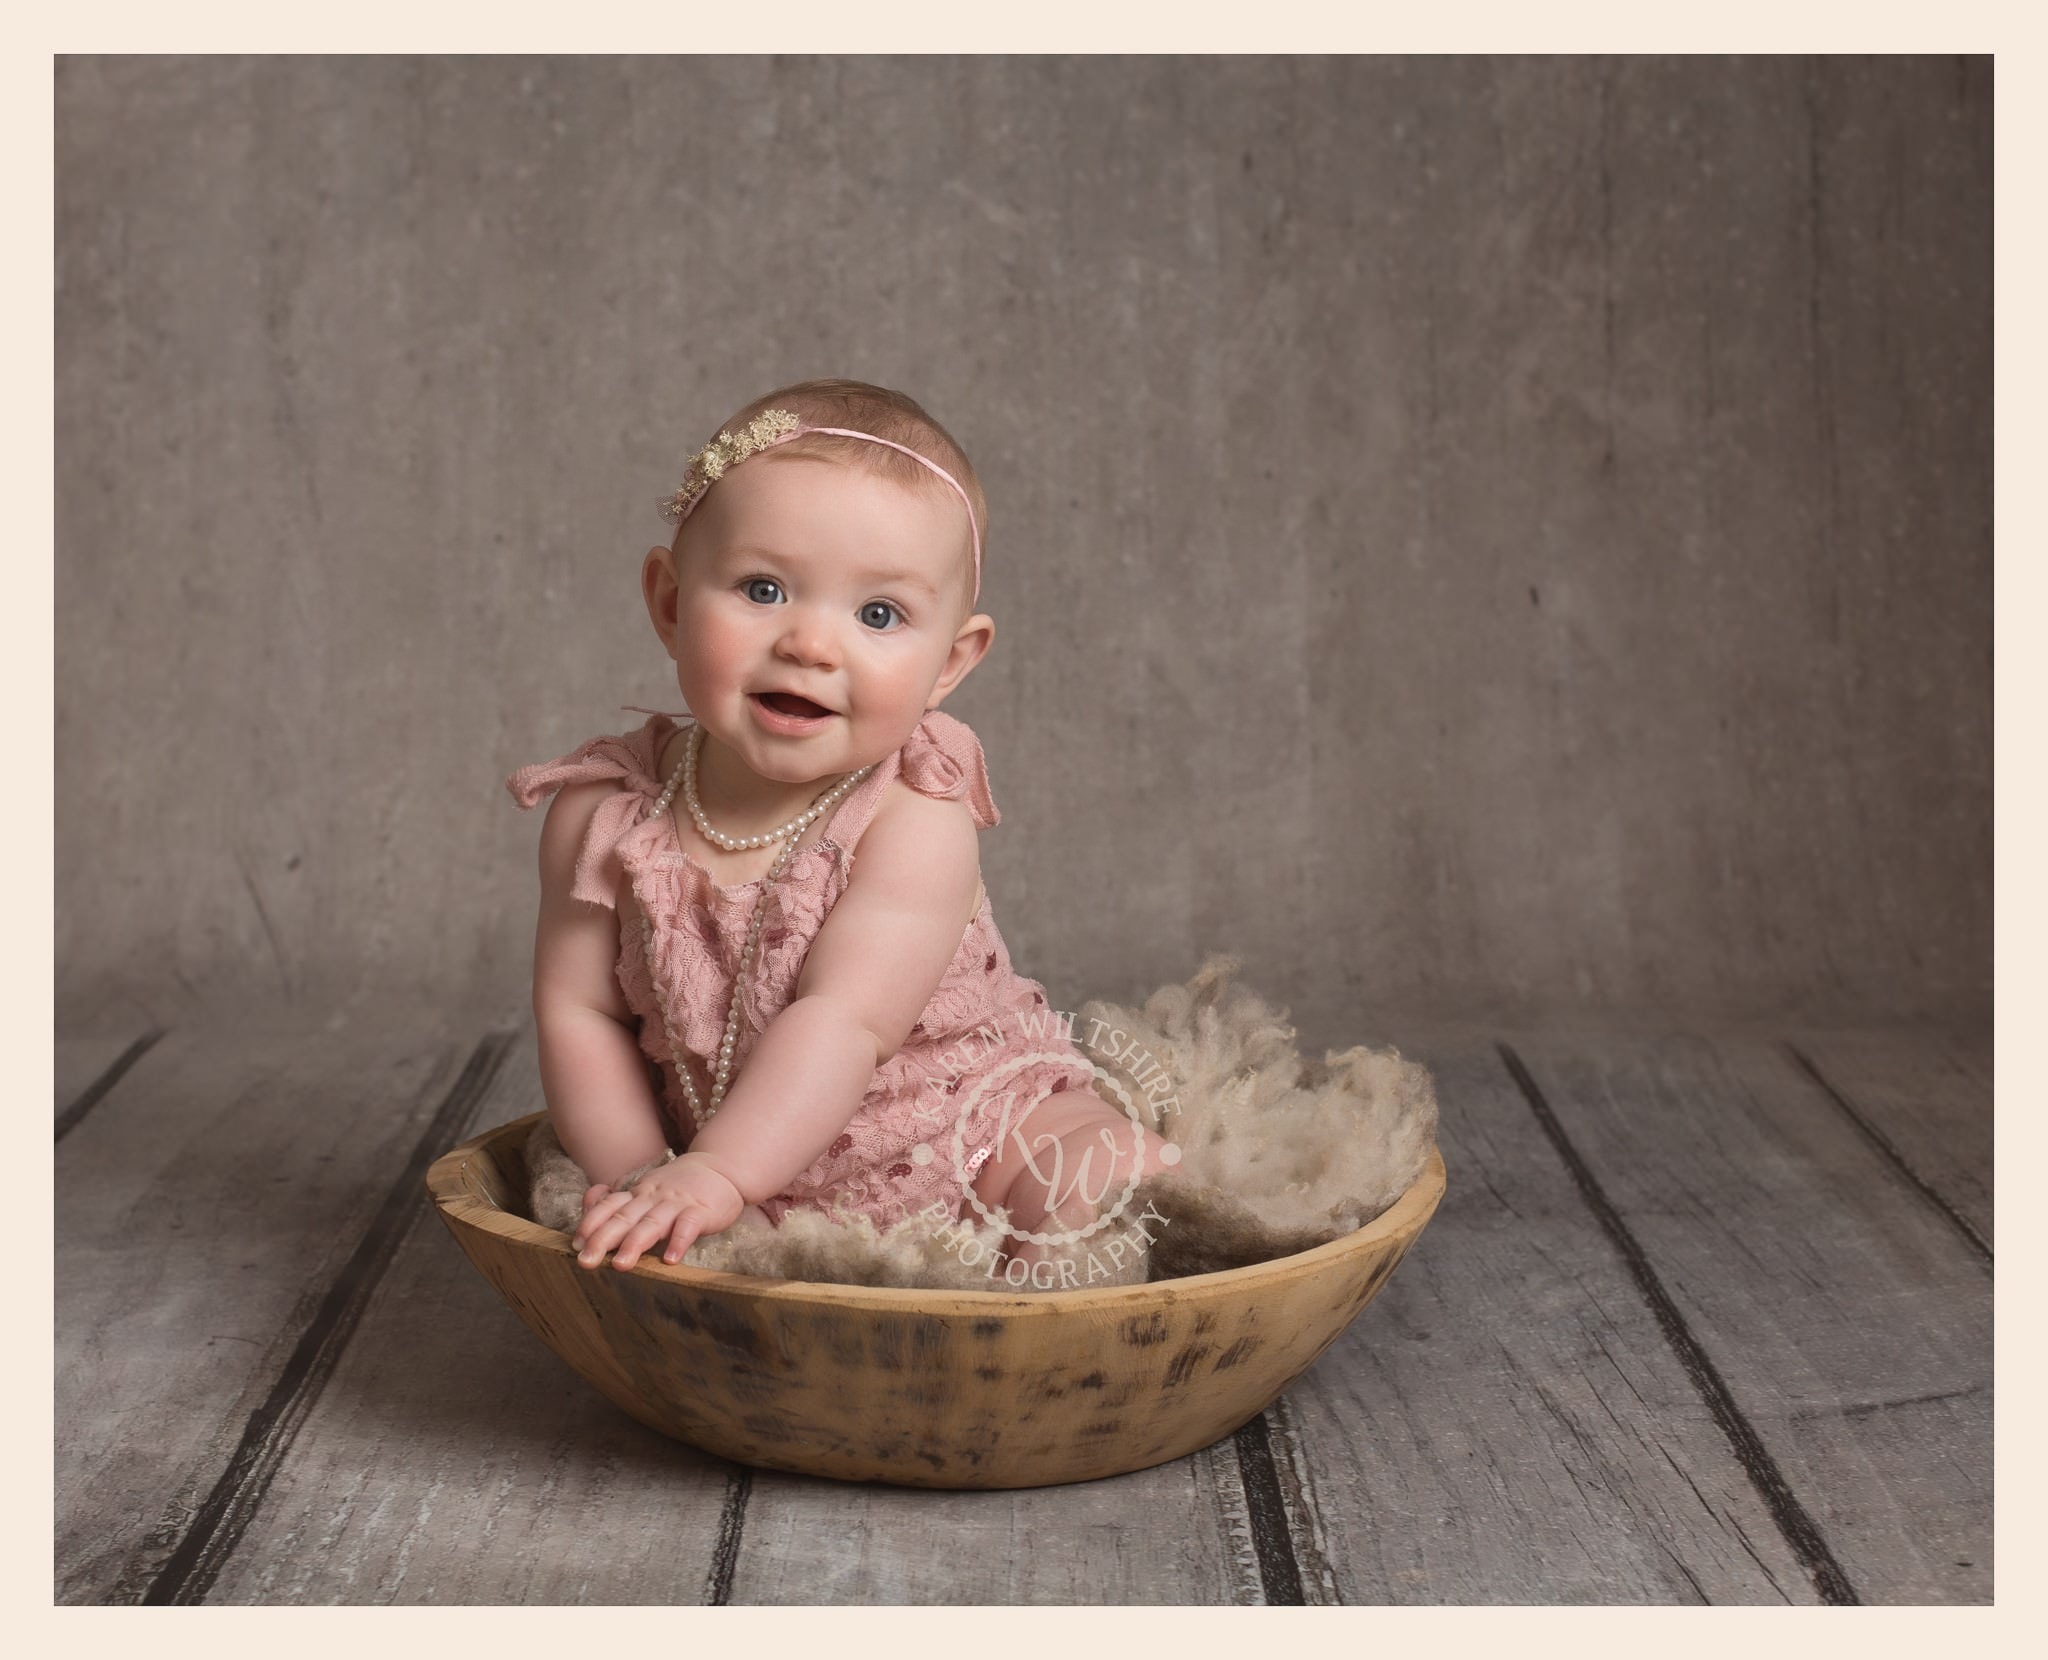 Cute sitting baby girl in wooded bowl